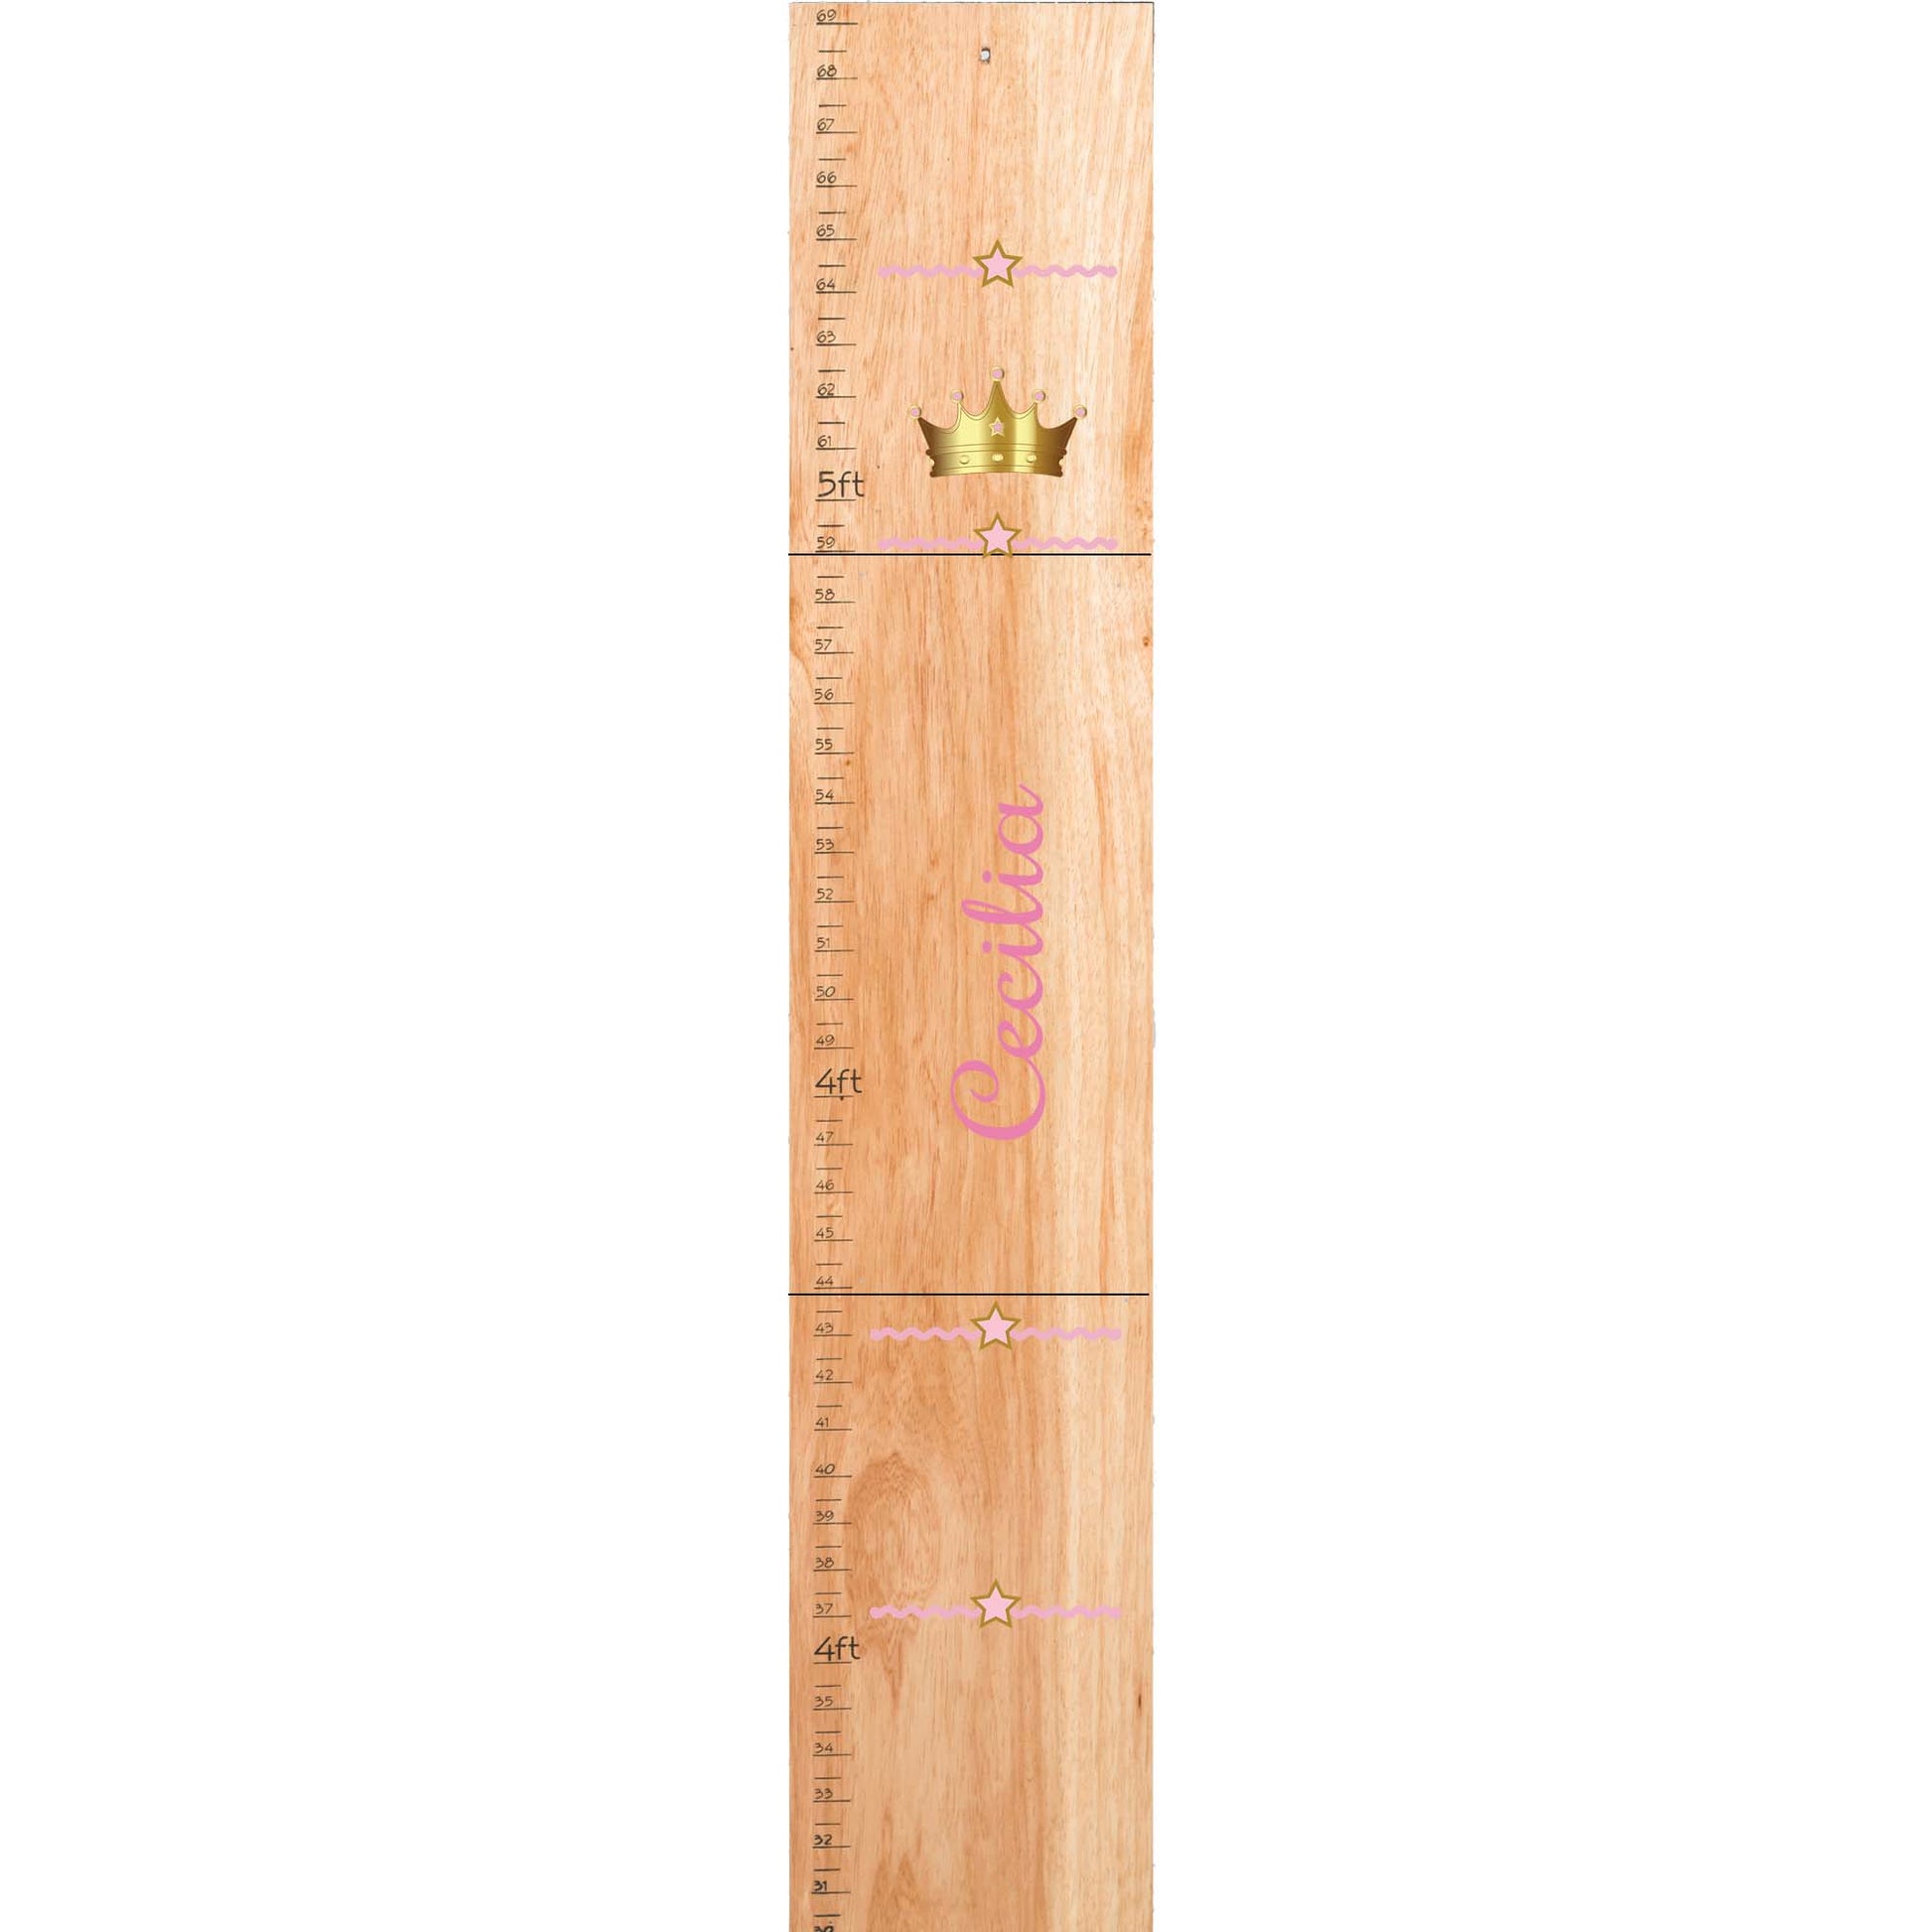 Personalized Natural Growth Chart With Tribal Arrow Girls Design